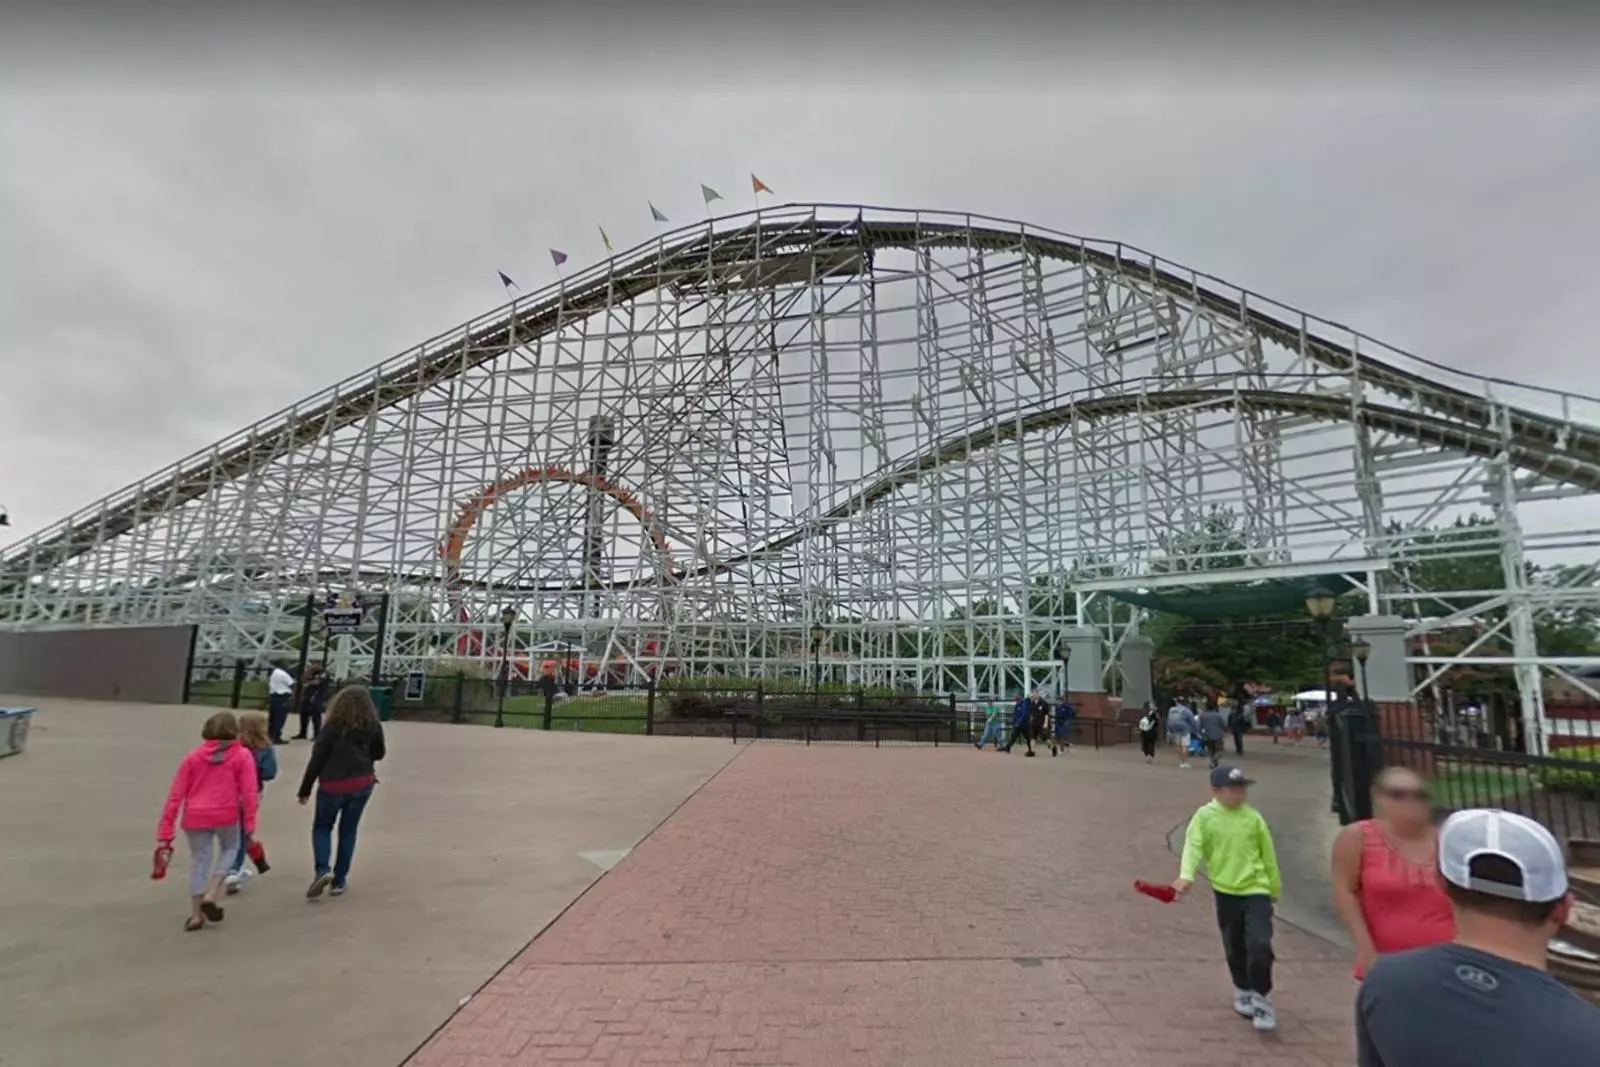 After 100 Years, Lagoon's Roller Coaster Still Has People Lining Up For Its  Timeless Thrills